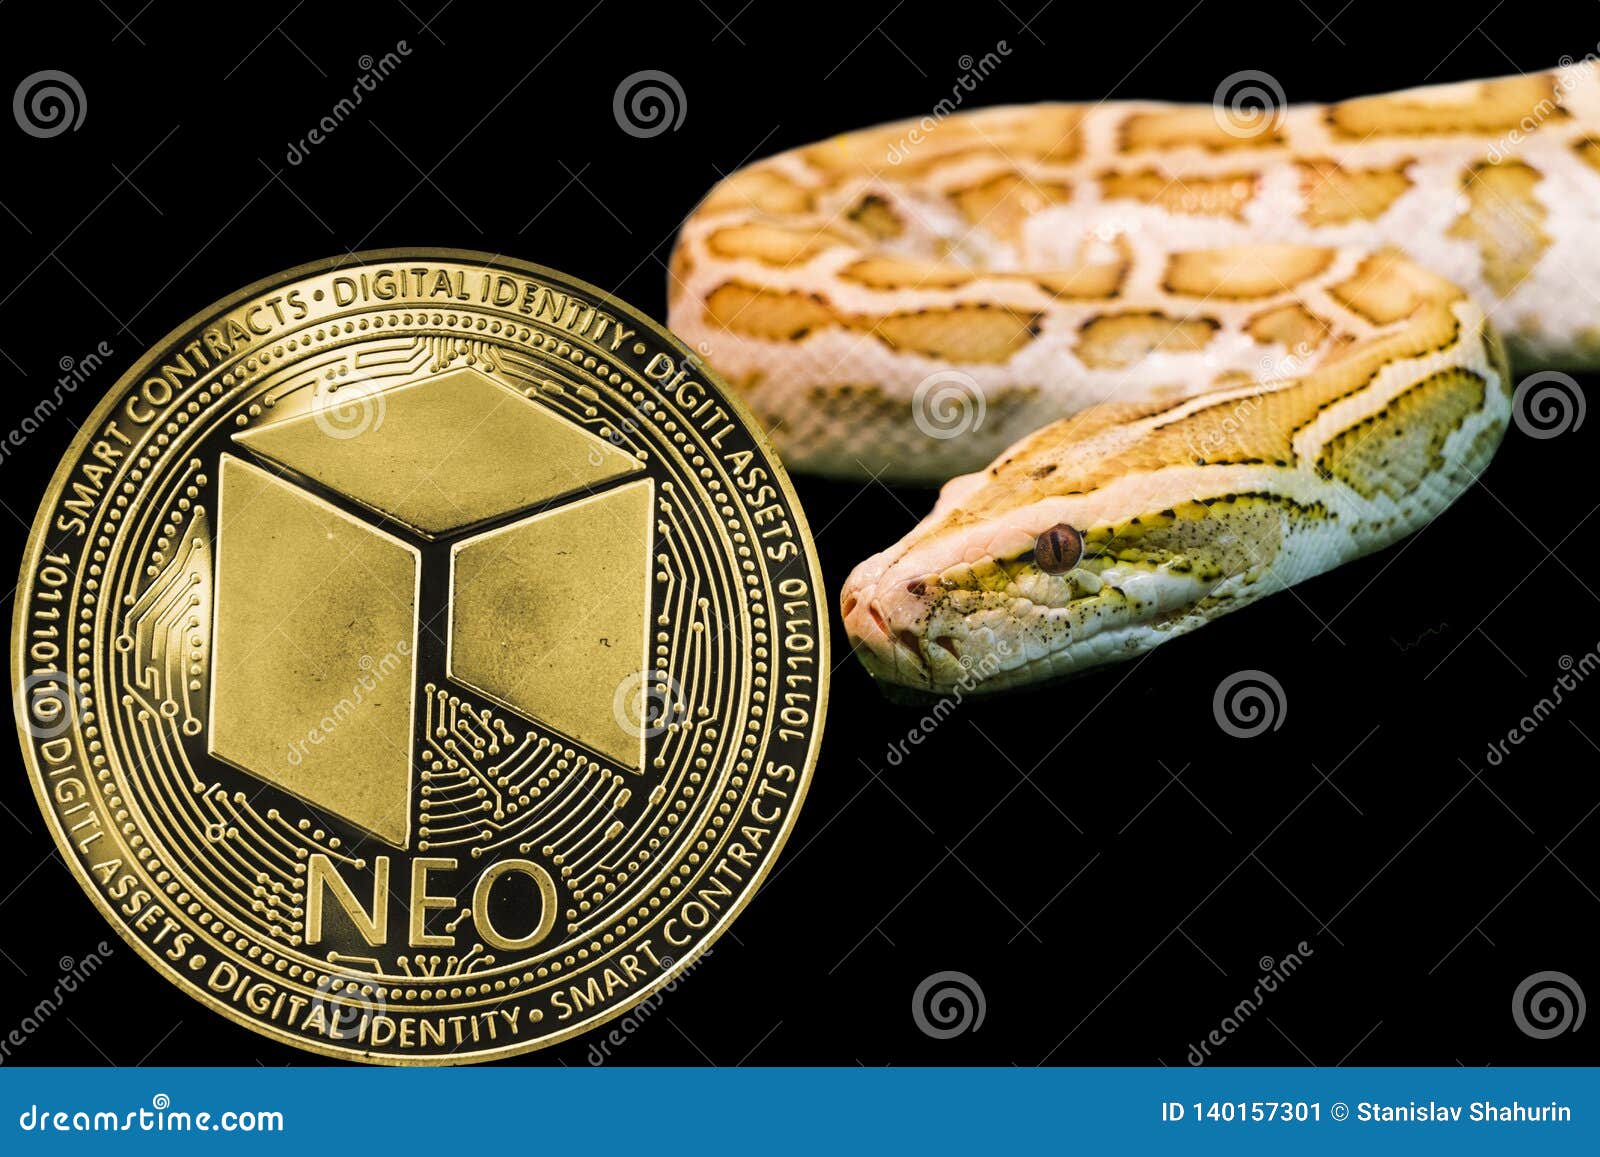 cryptocurrency pictures of snakes